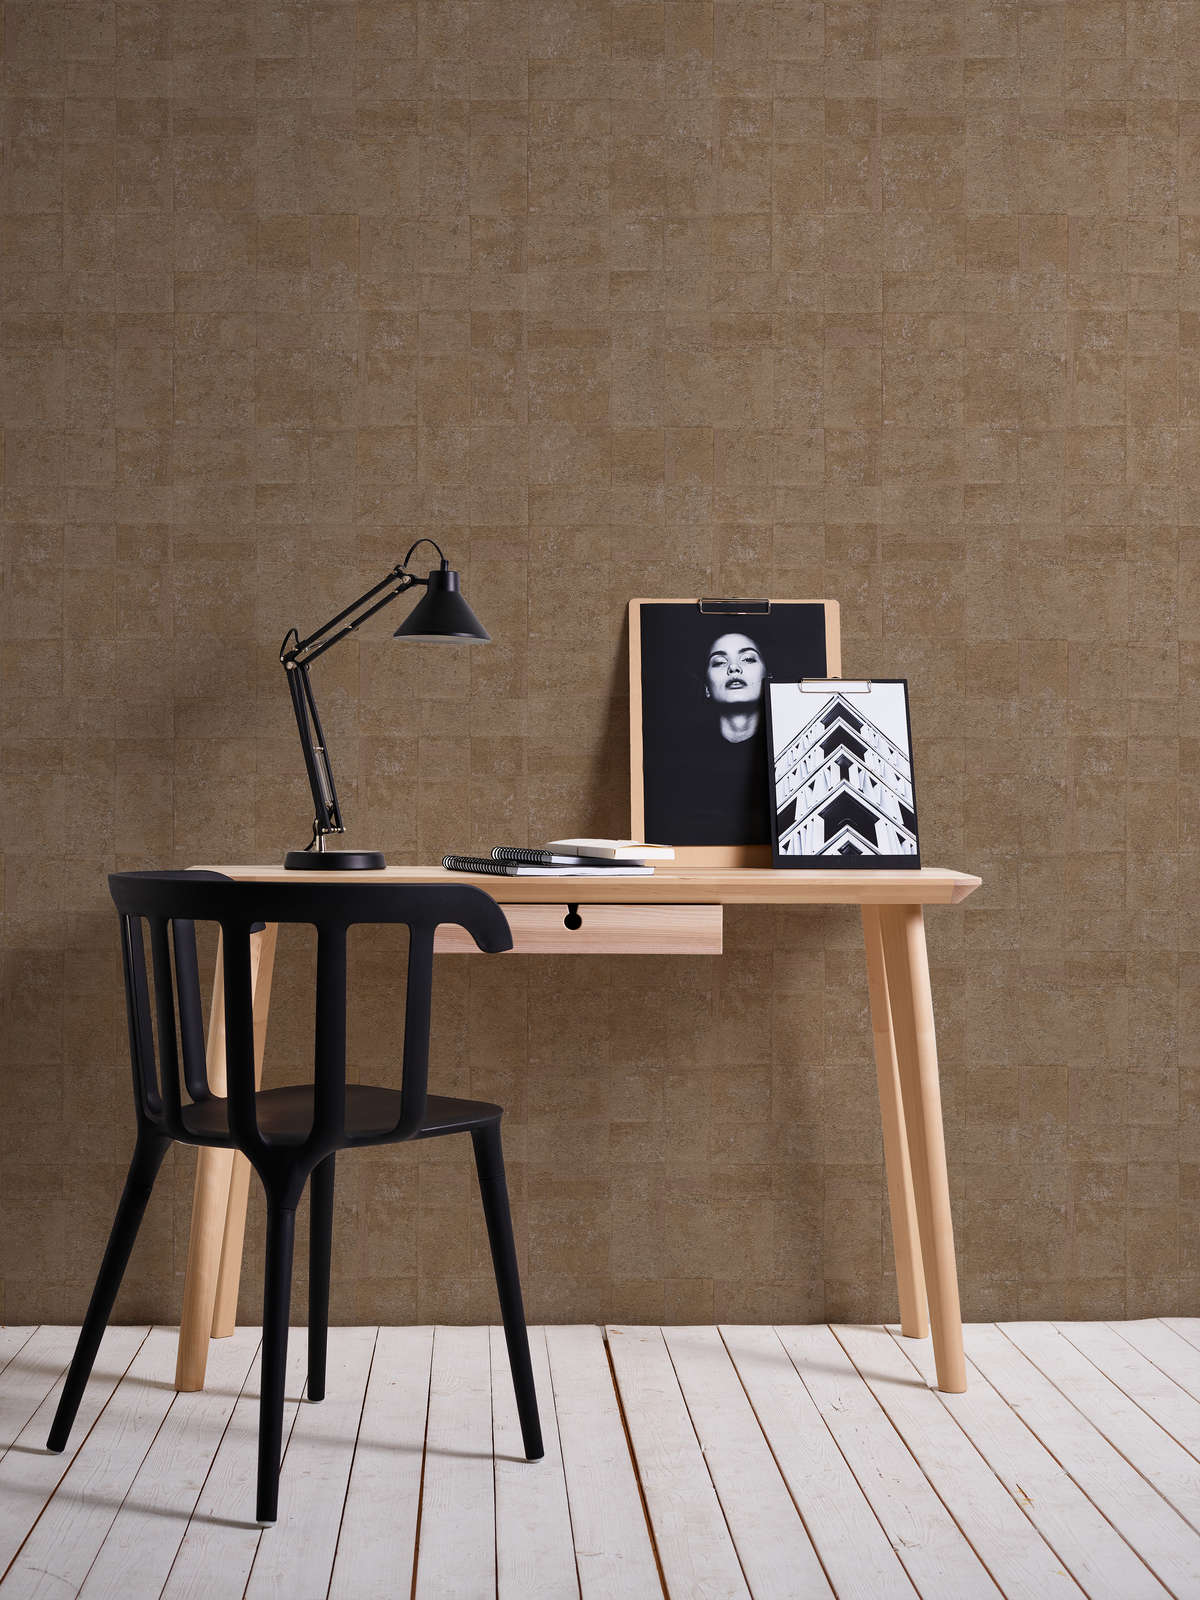             Textured non-woven wallpaper in tile look with metallic effect - Gold
        